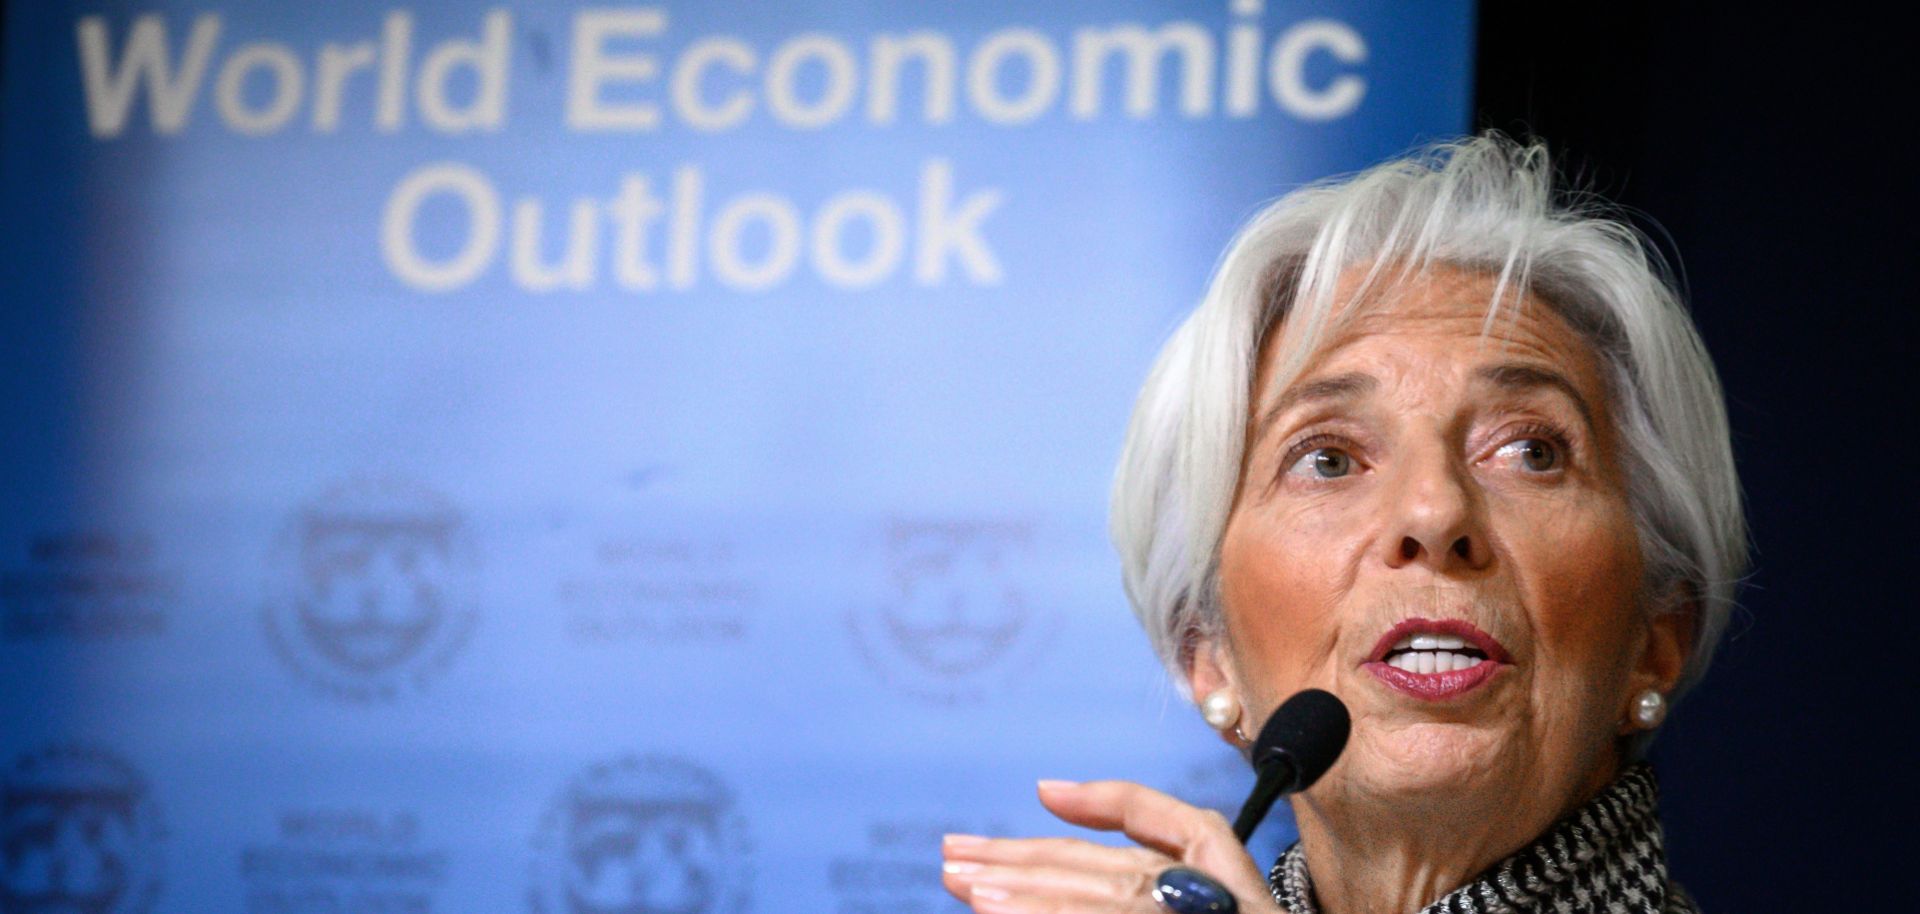 Christine Lagarde, managing director of the International Monetary Fund, delivers an update of her institution's outlook for the global economy in 2019.